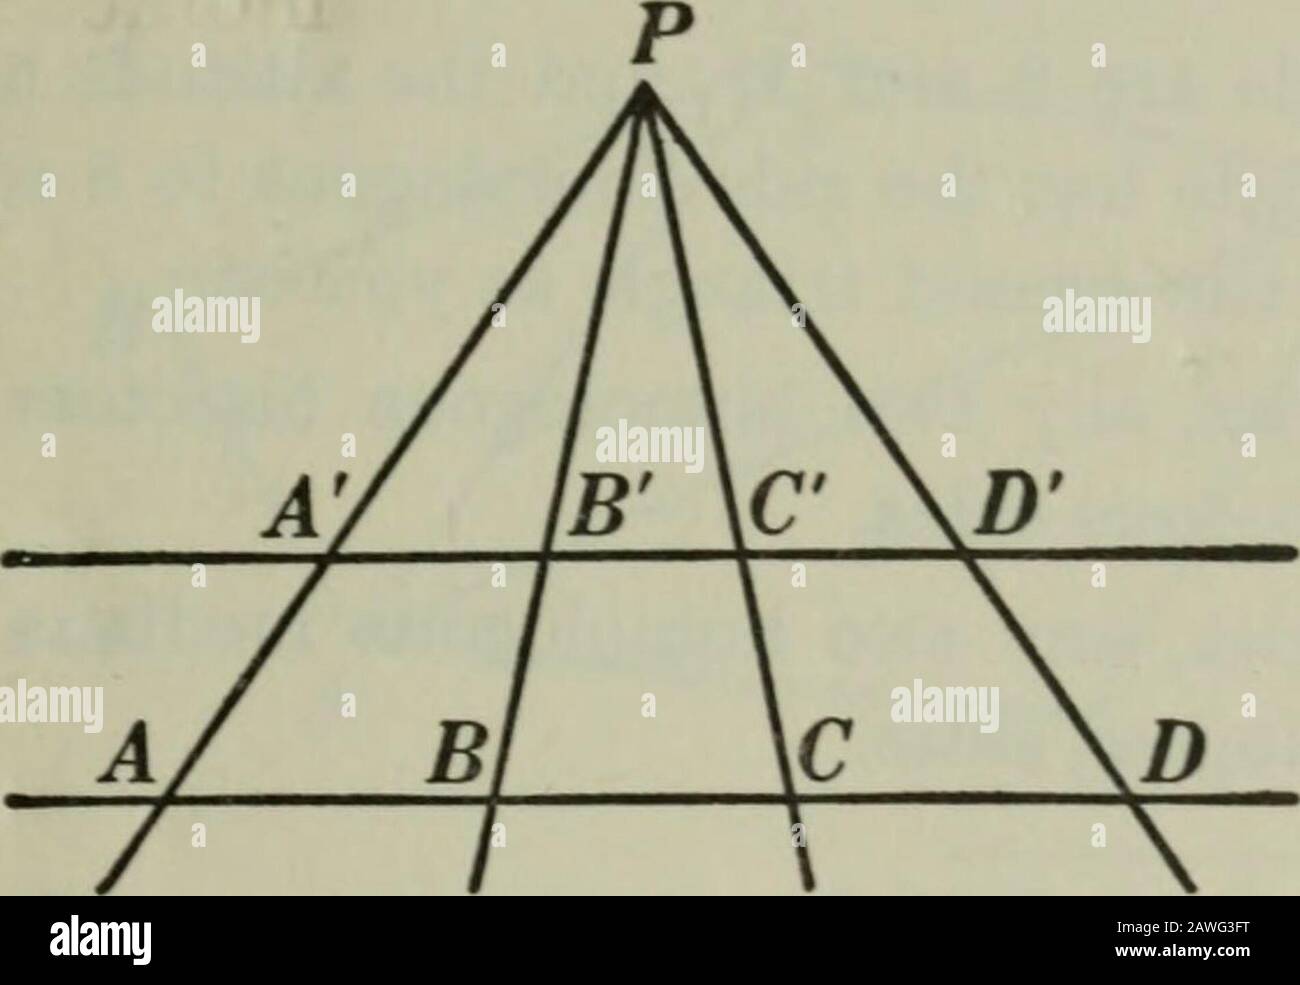 Plane And Solid Geometry Given Two Similar A Abc And Def With Two Correspondingfaltitudes Ah And Dk Ah Ab Ca To Prove